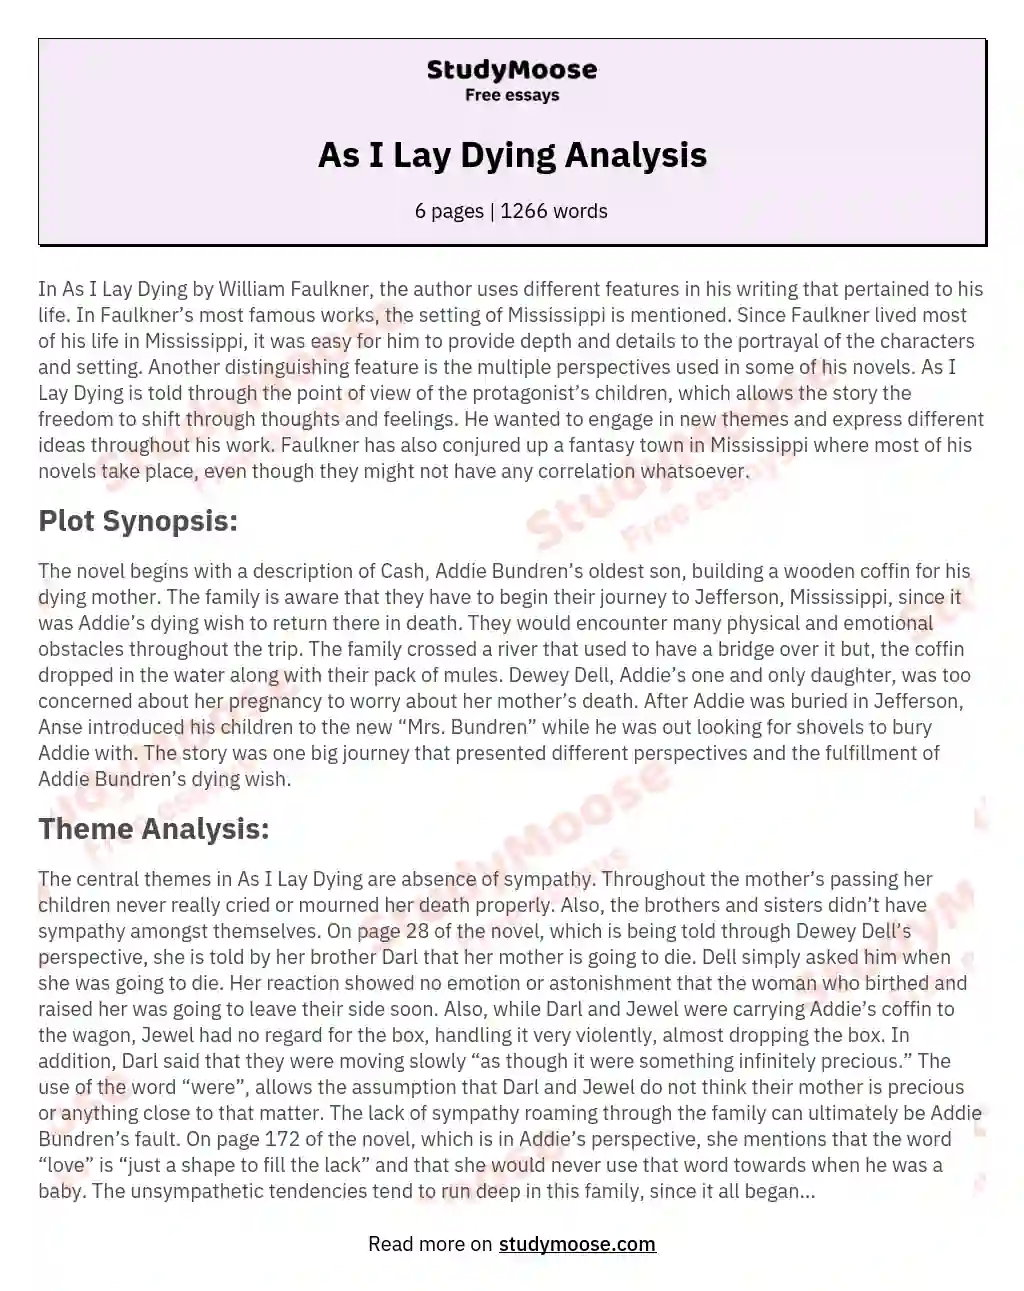 As I Lay Dying Analysis essay